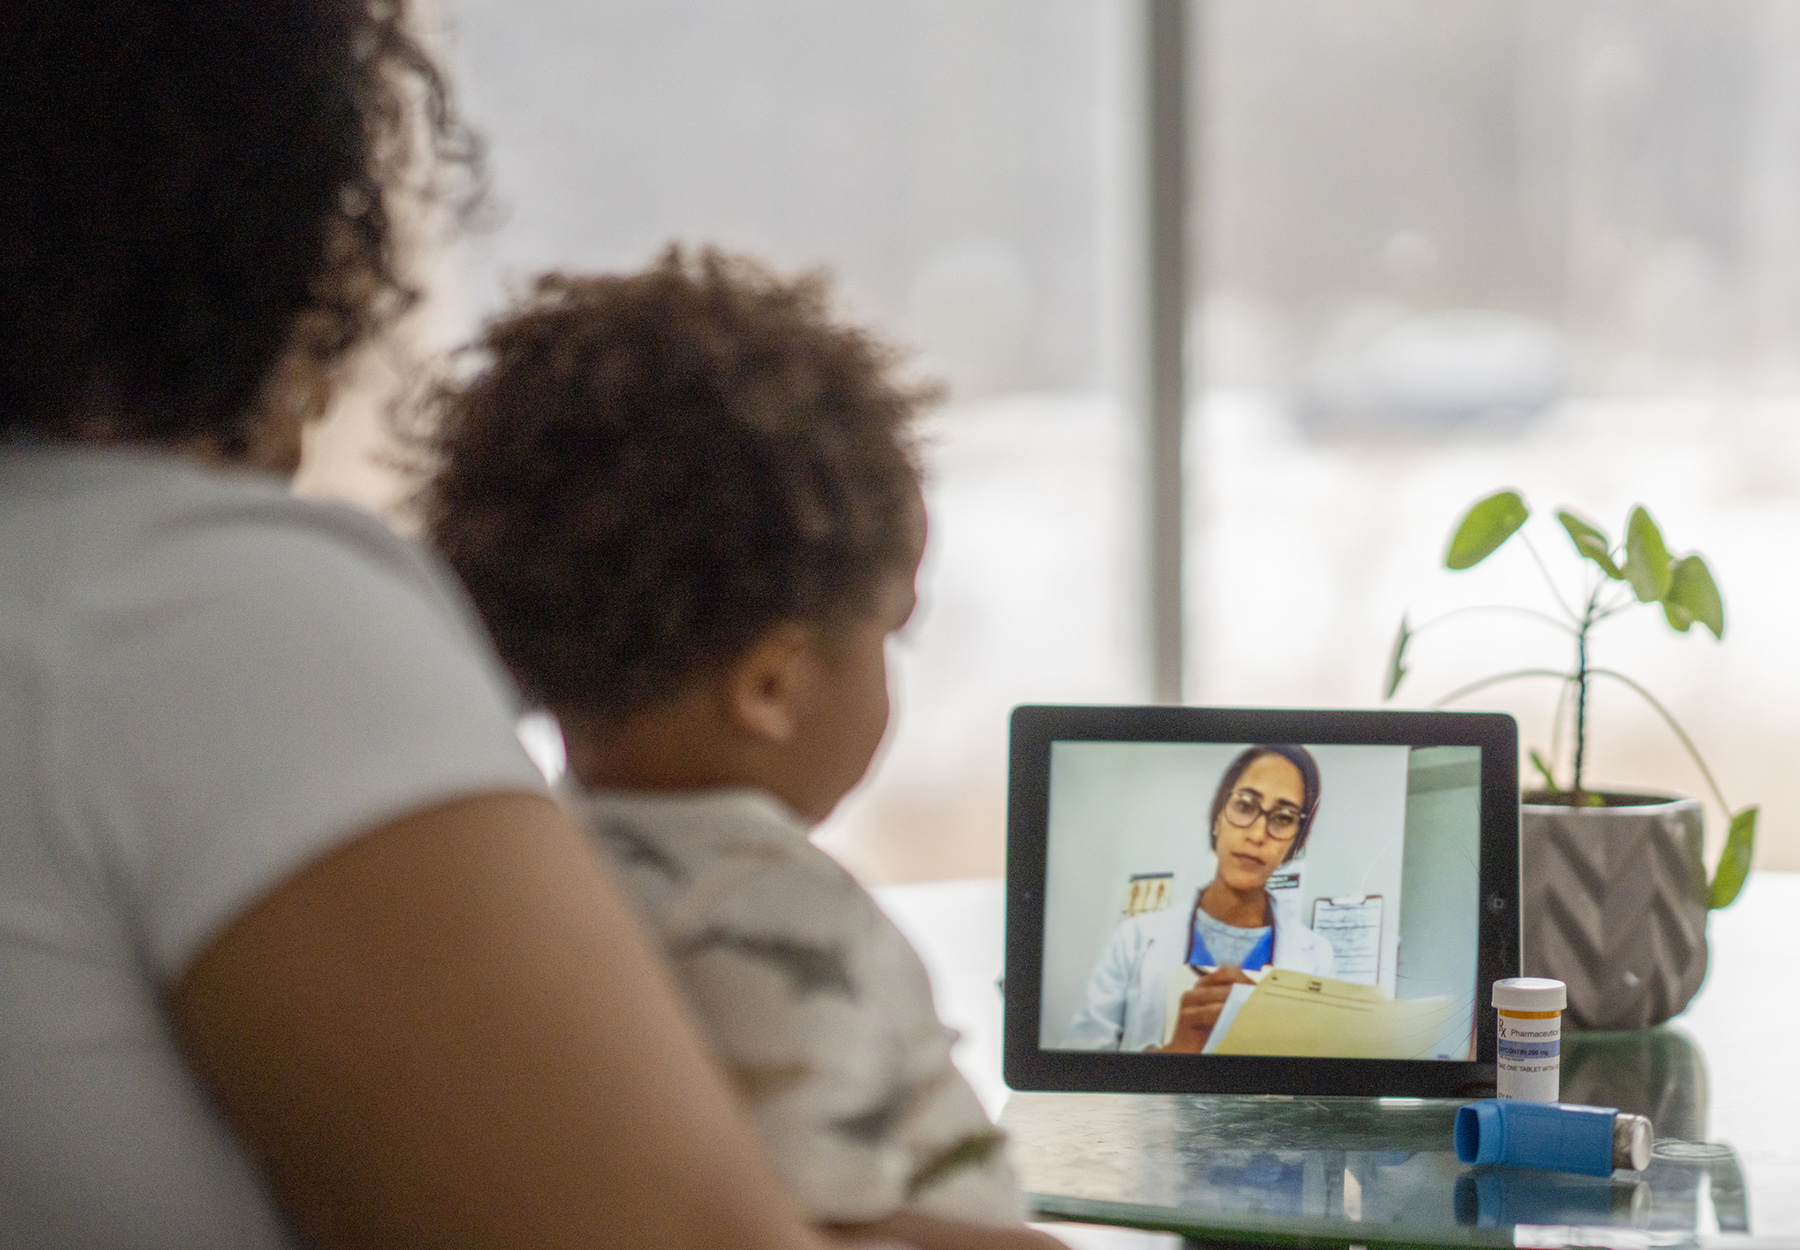 African American mother sitting with her sick child and speaking with a medical professional via video chat during the COVID-19 pandemic. Stock photo.